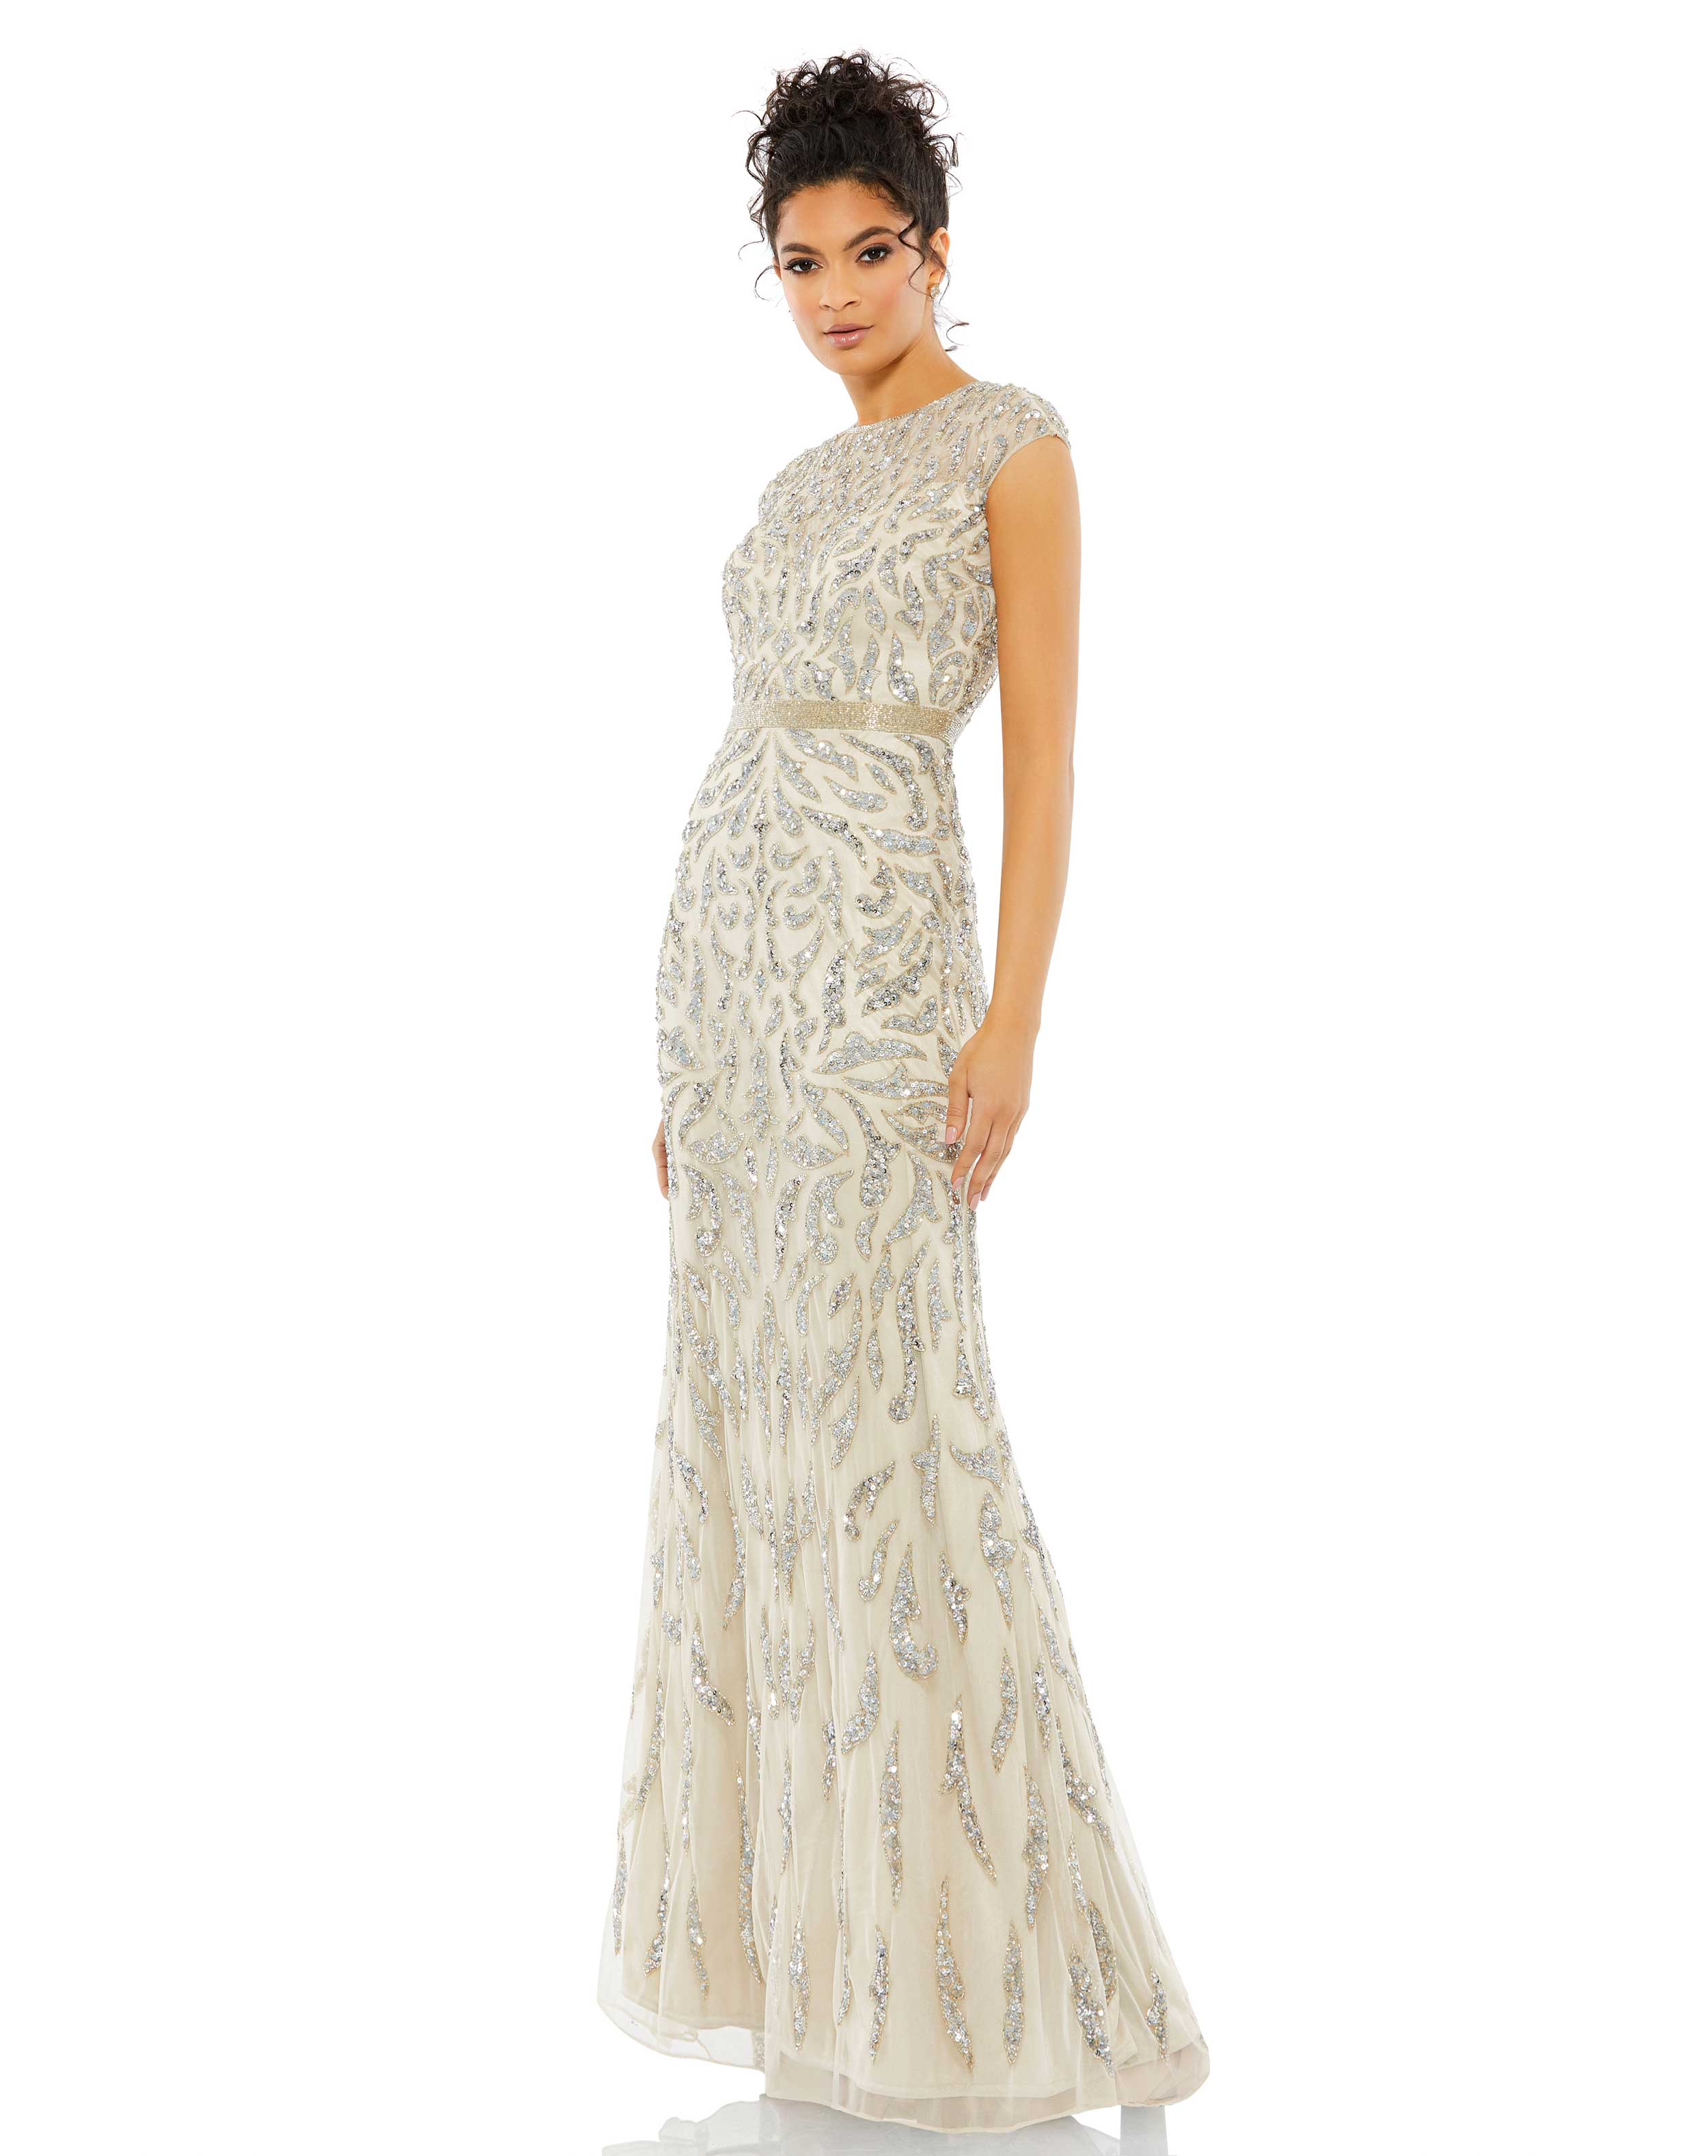 Embellished Illusion Cap Sleeve Column Gown